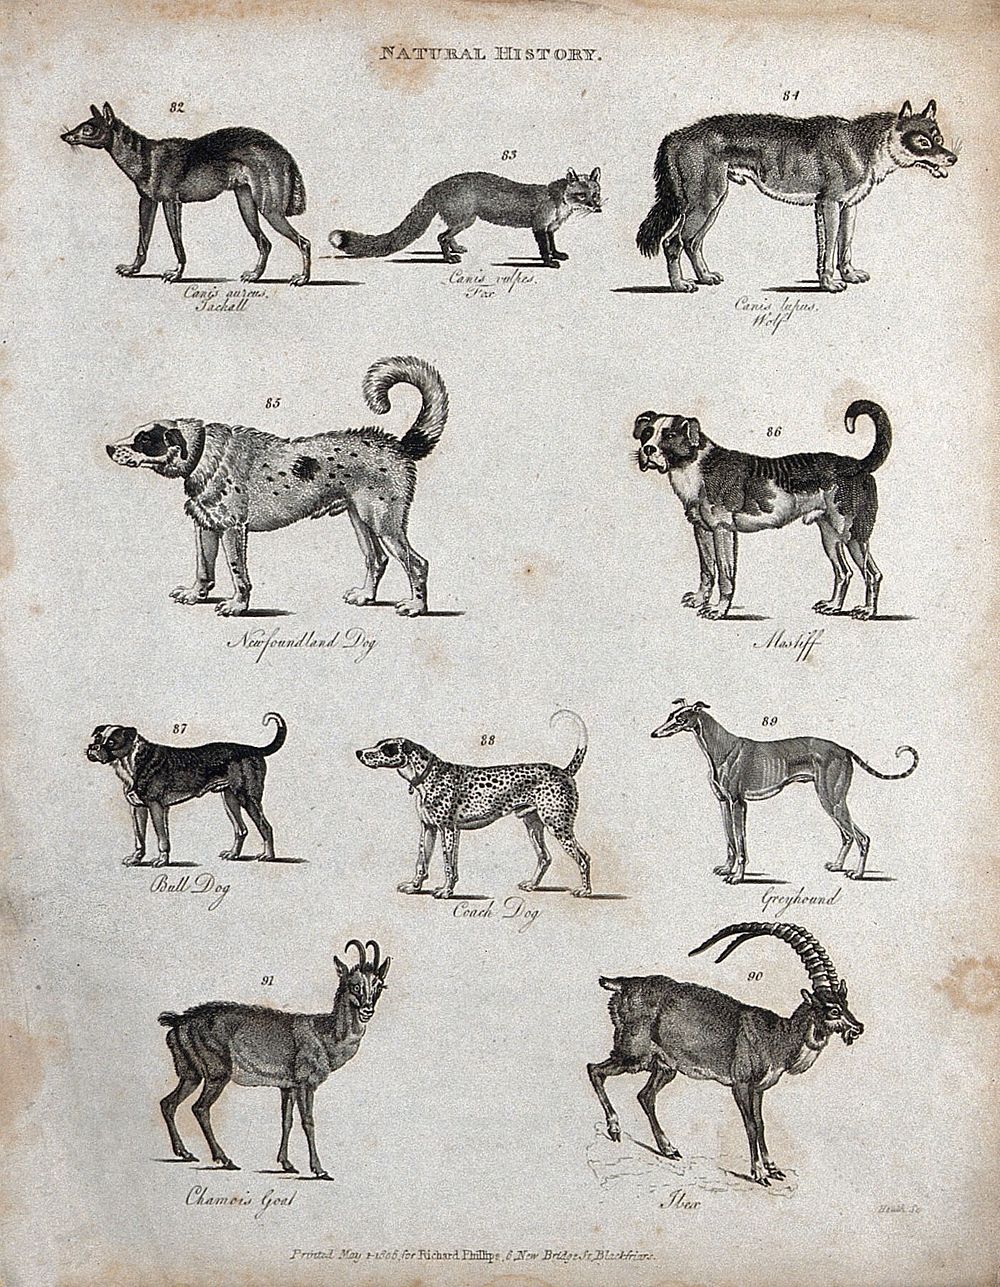 Above, a jackall, a fox, a wolf and two dogs; below, a bulldog, a Coach dog, a greyhound, a chamois goat and an ibex.…